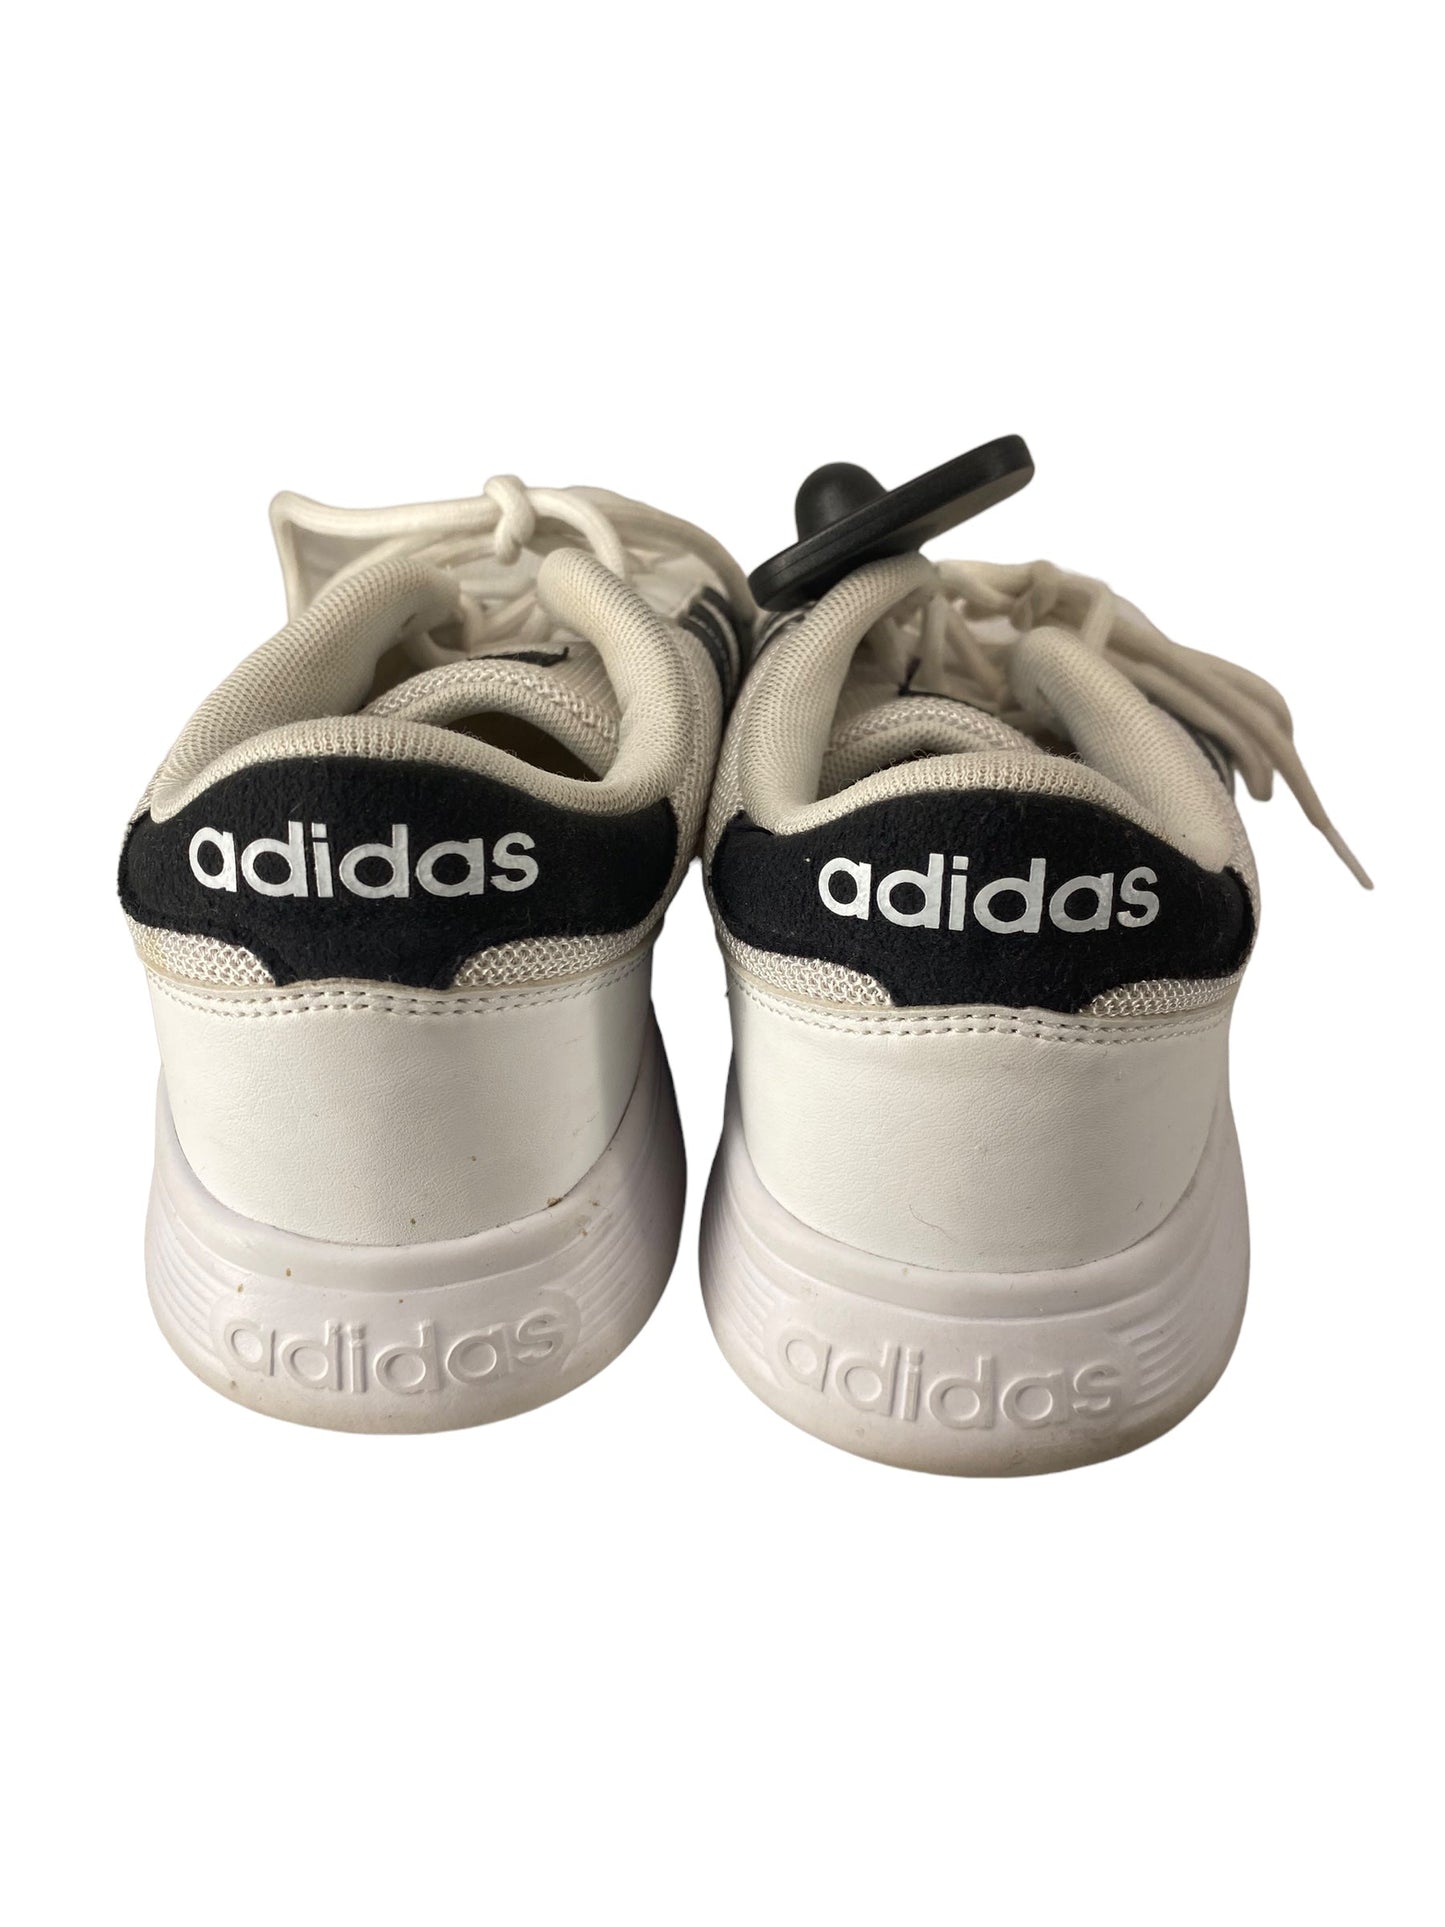 Shoes Sneakers By Adidas  Size: 8